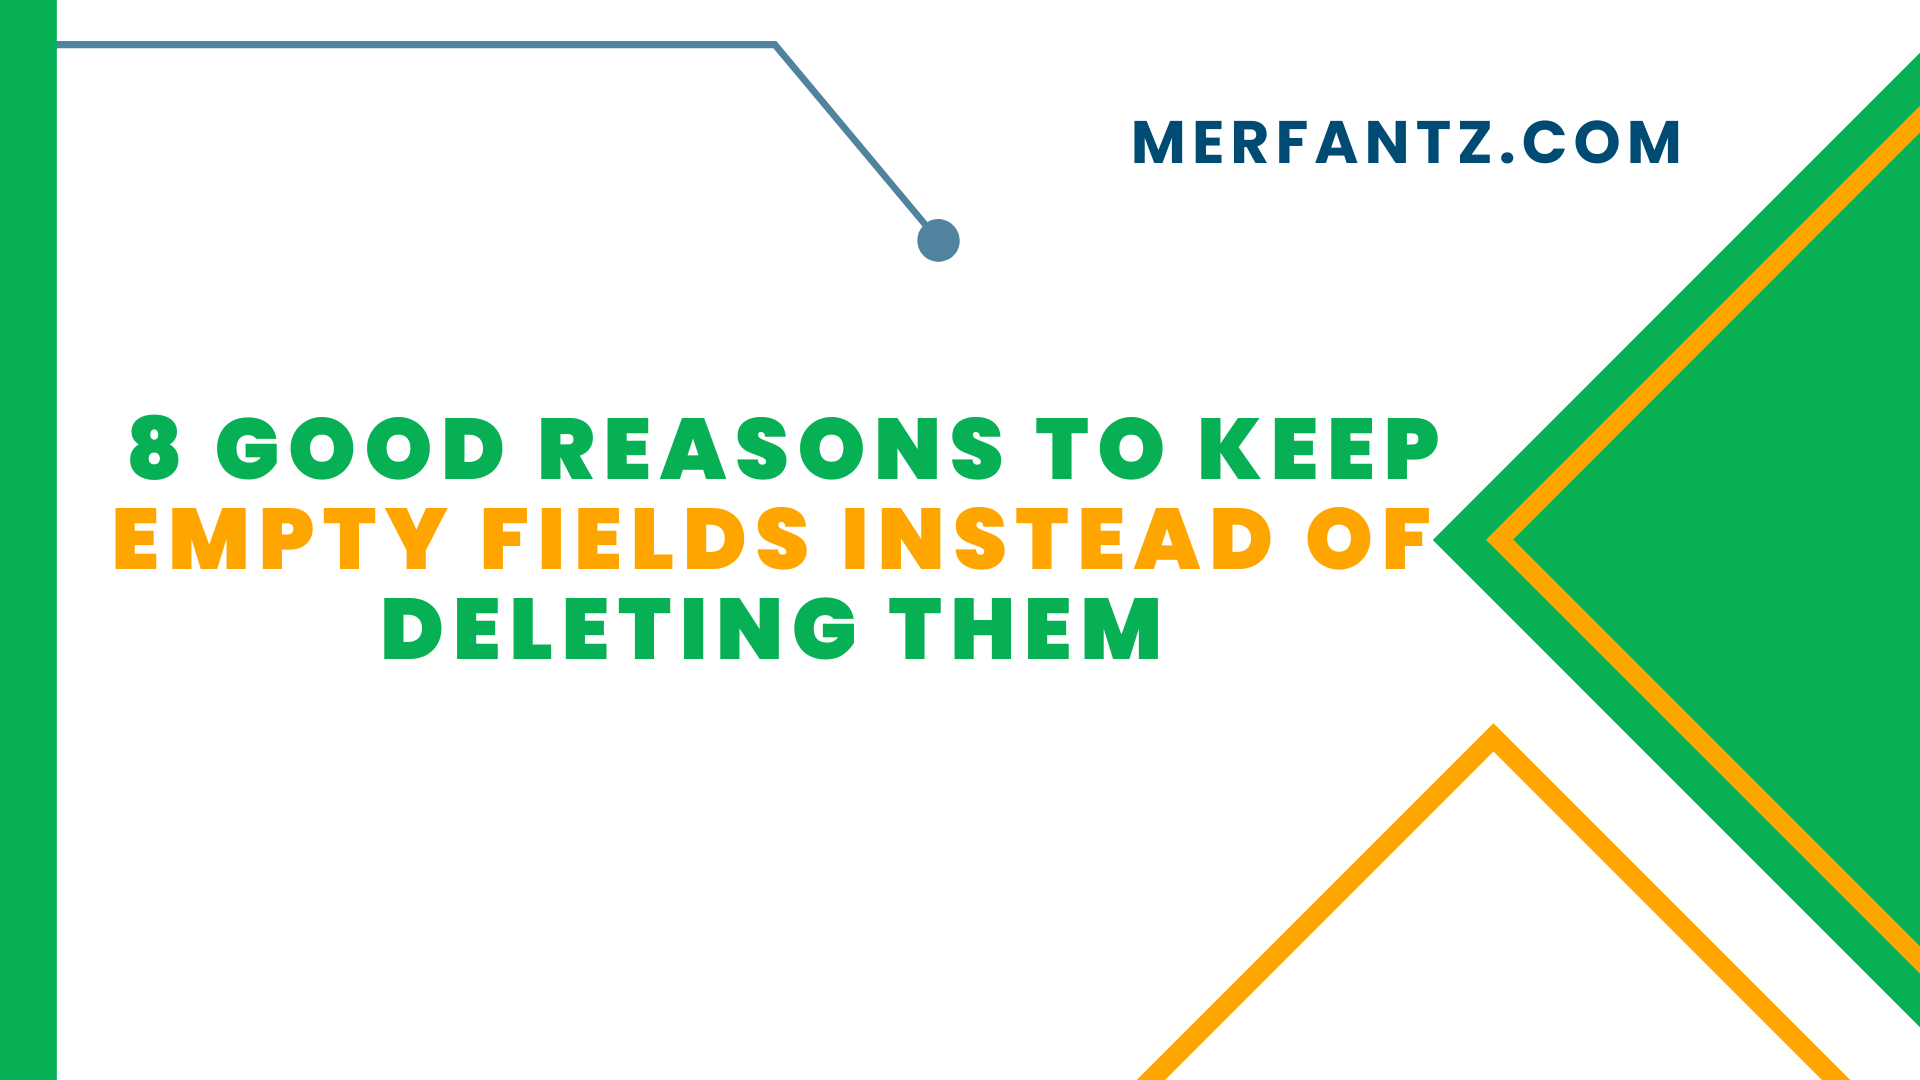 8 Good Reasons to Keep Empty Fields Instead of Deleting Them